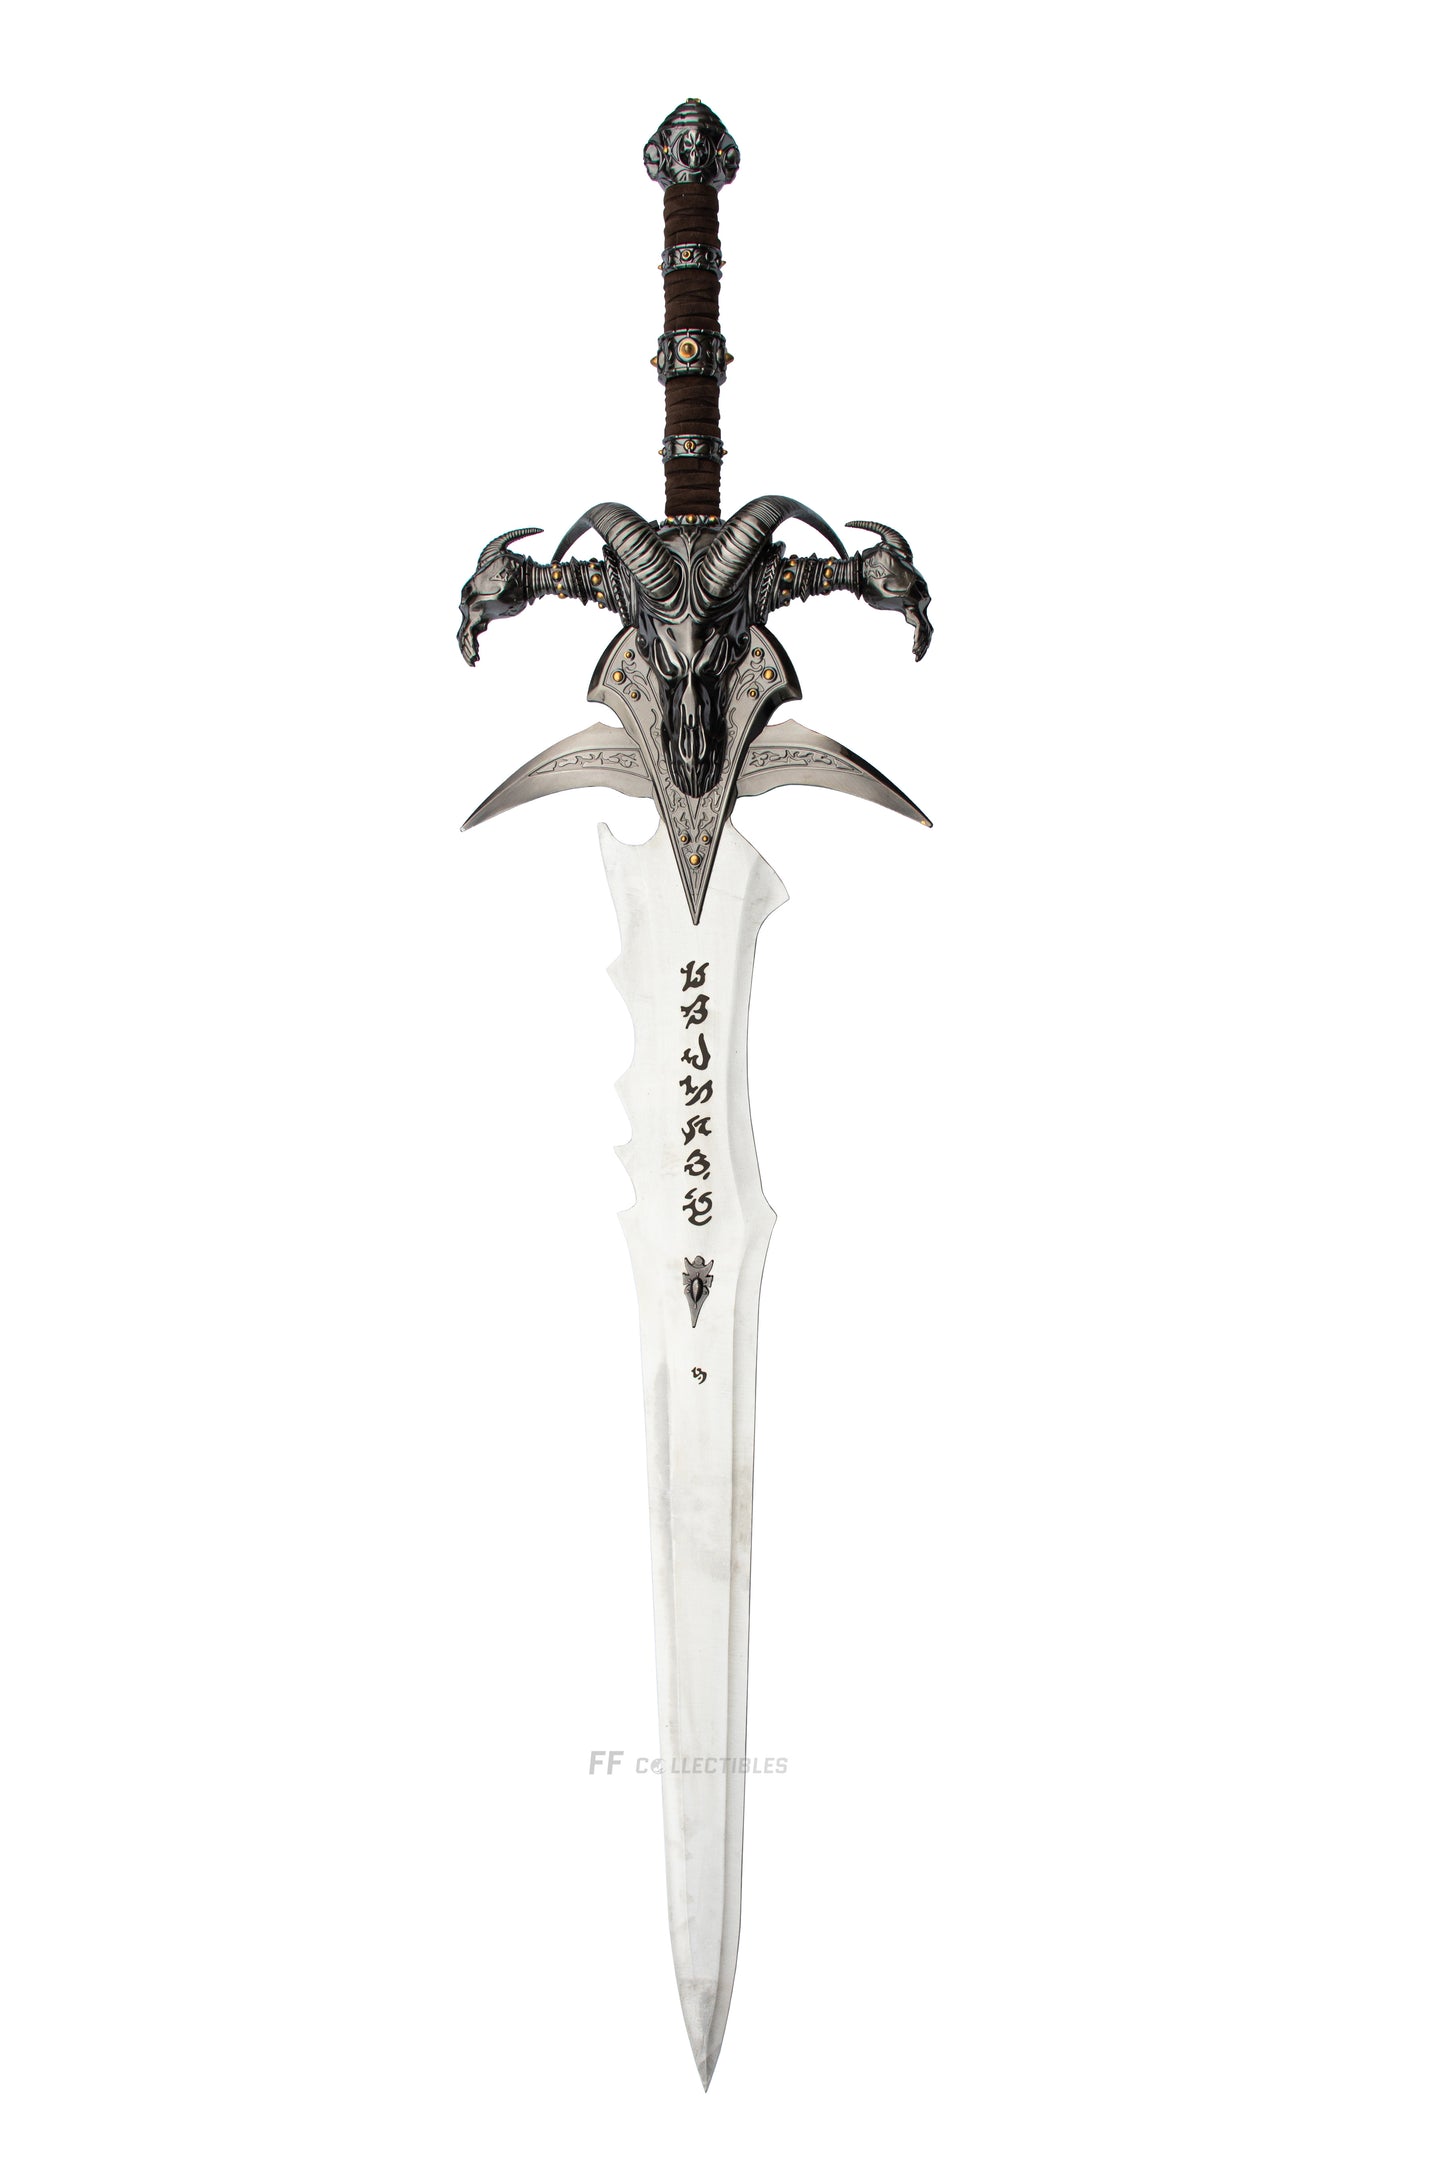 WORLD OF WARCRAFT - LICH KING FROSTMOURNE SWORD REPLICA (with FREE WALL PLAQUE)